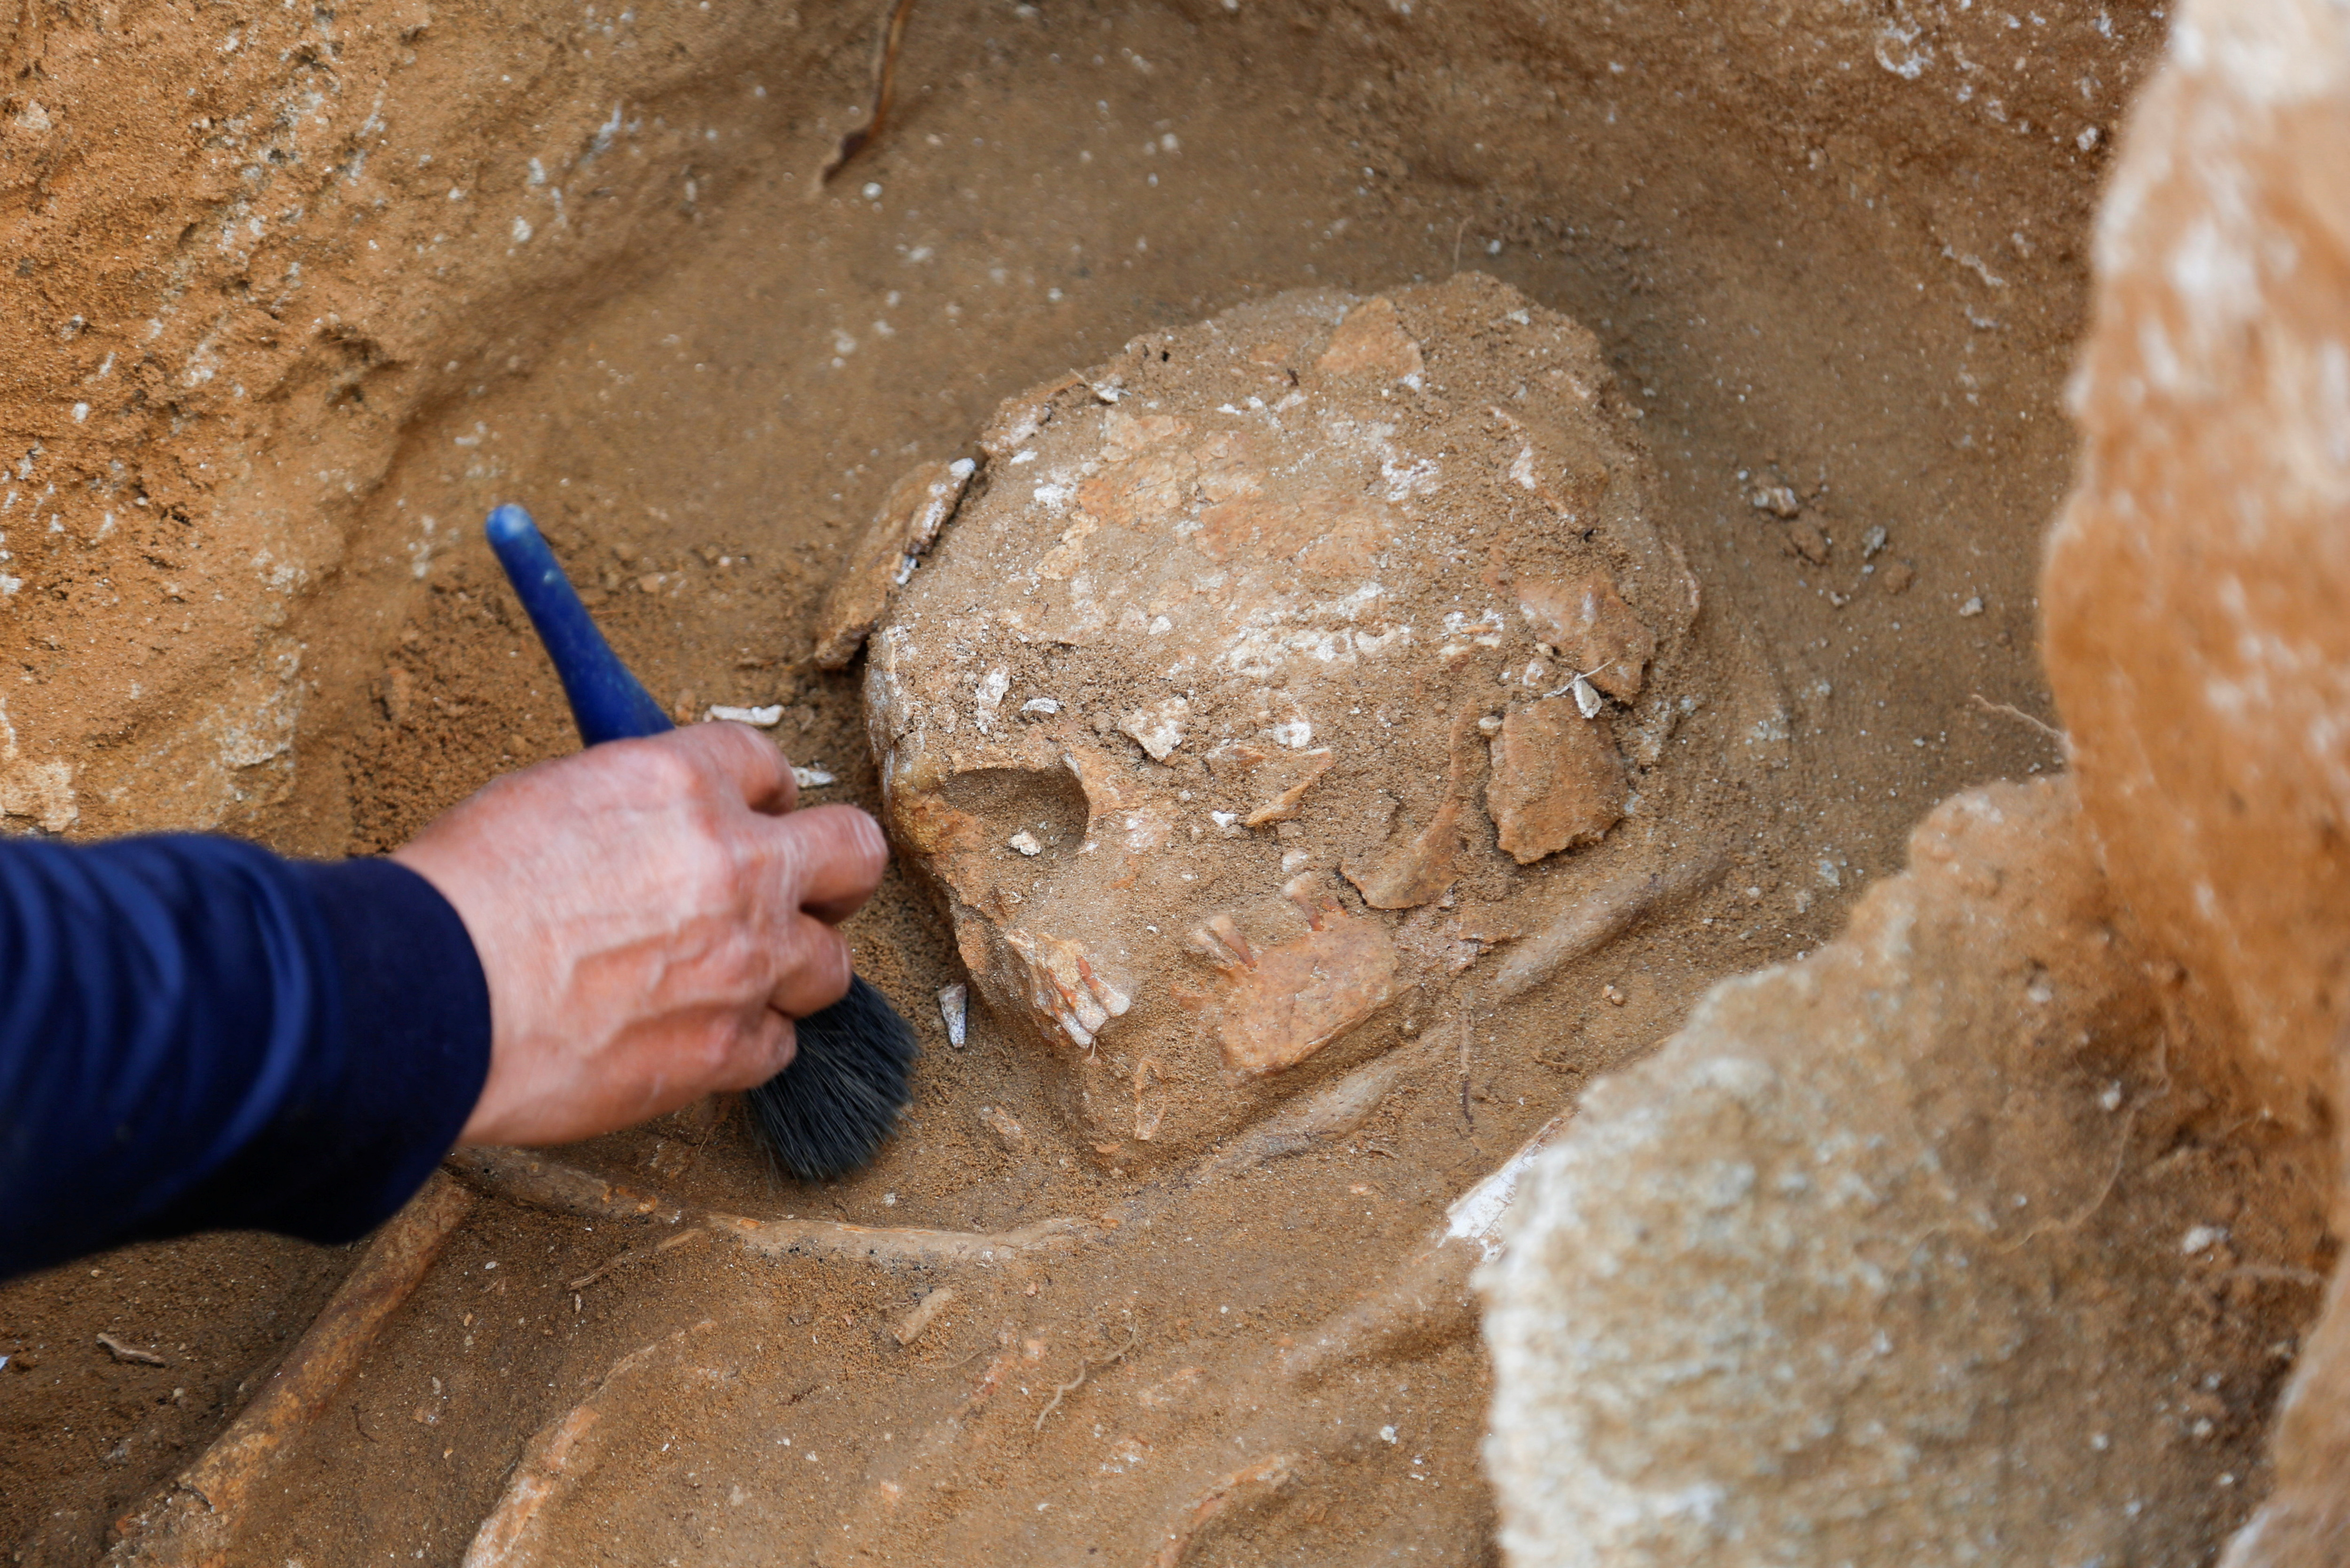 An archeology expert works on remains found in a grave at the site of a 2000-year-old Roman cemetery, that had been discovered last year,  in northern Gaza Strip